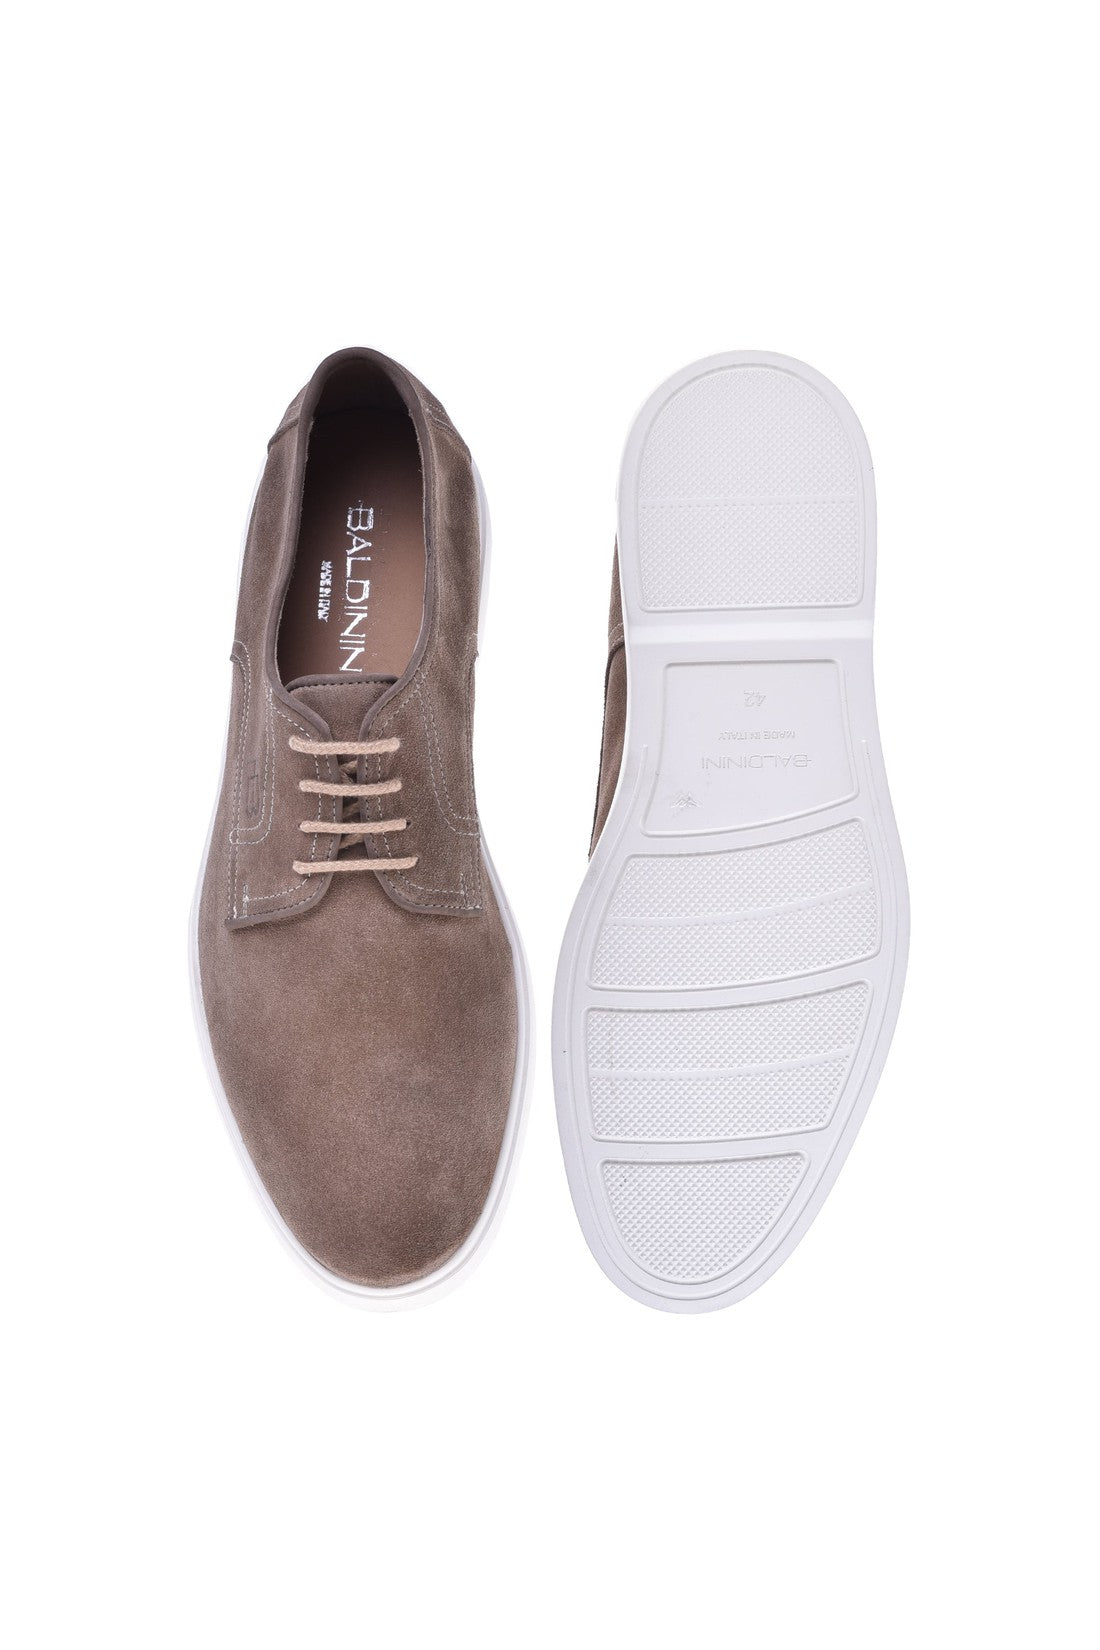 Taupe suede leather derby